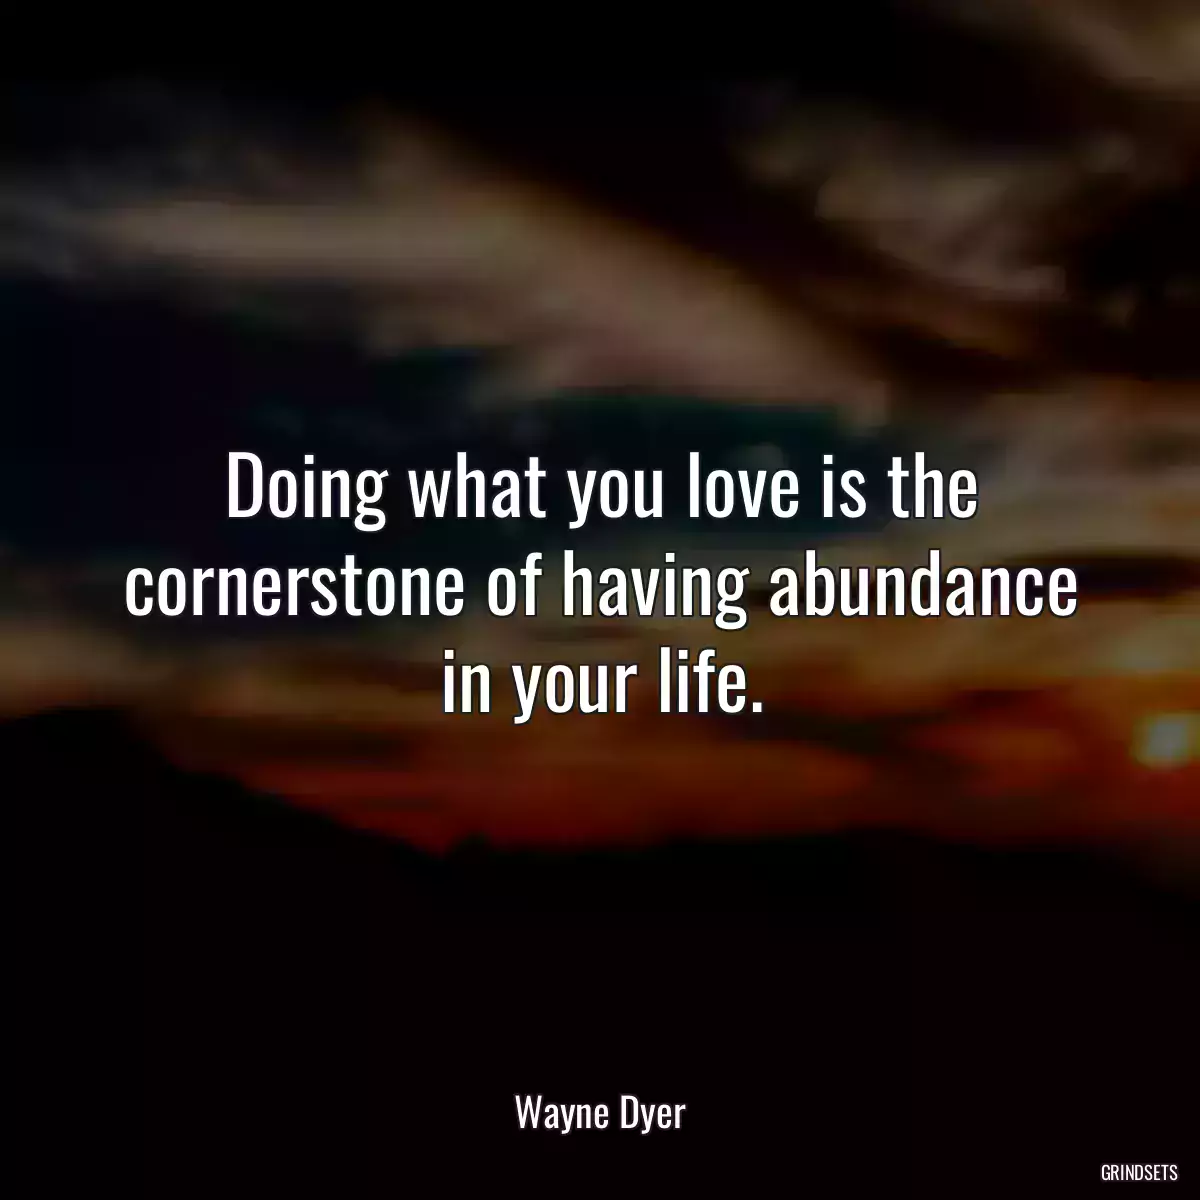 Doing what you love is the cornerstone of having abundance in your life.